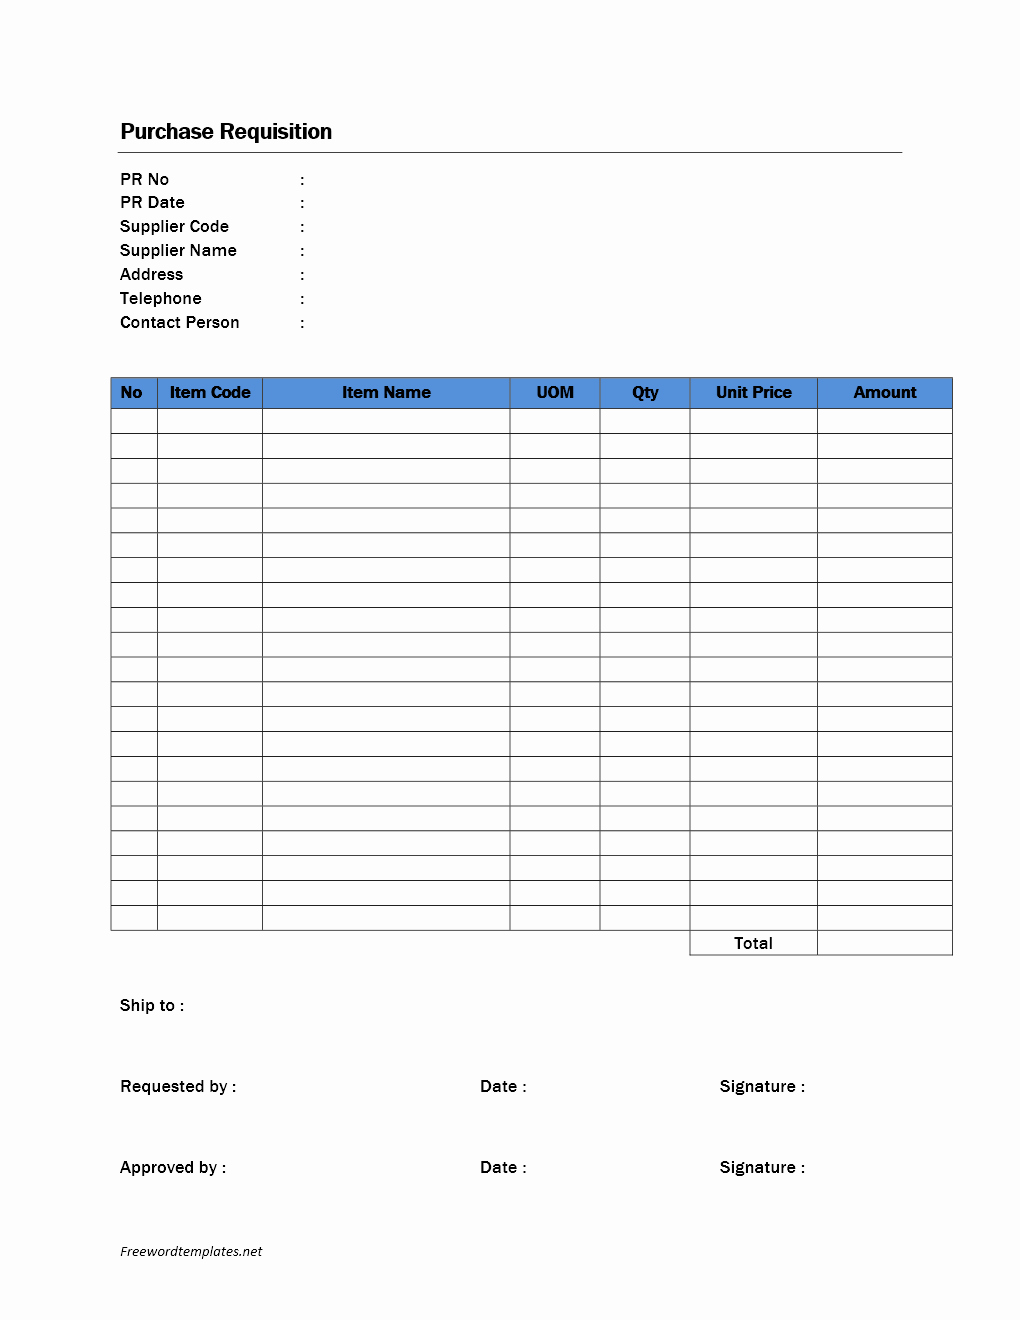 Purchase Requisition form